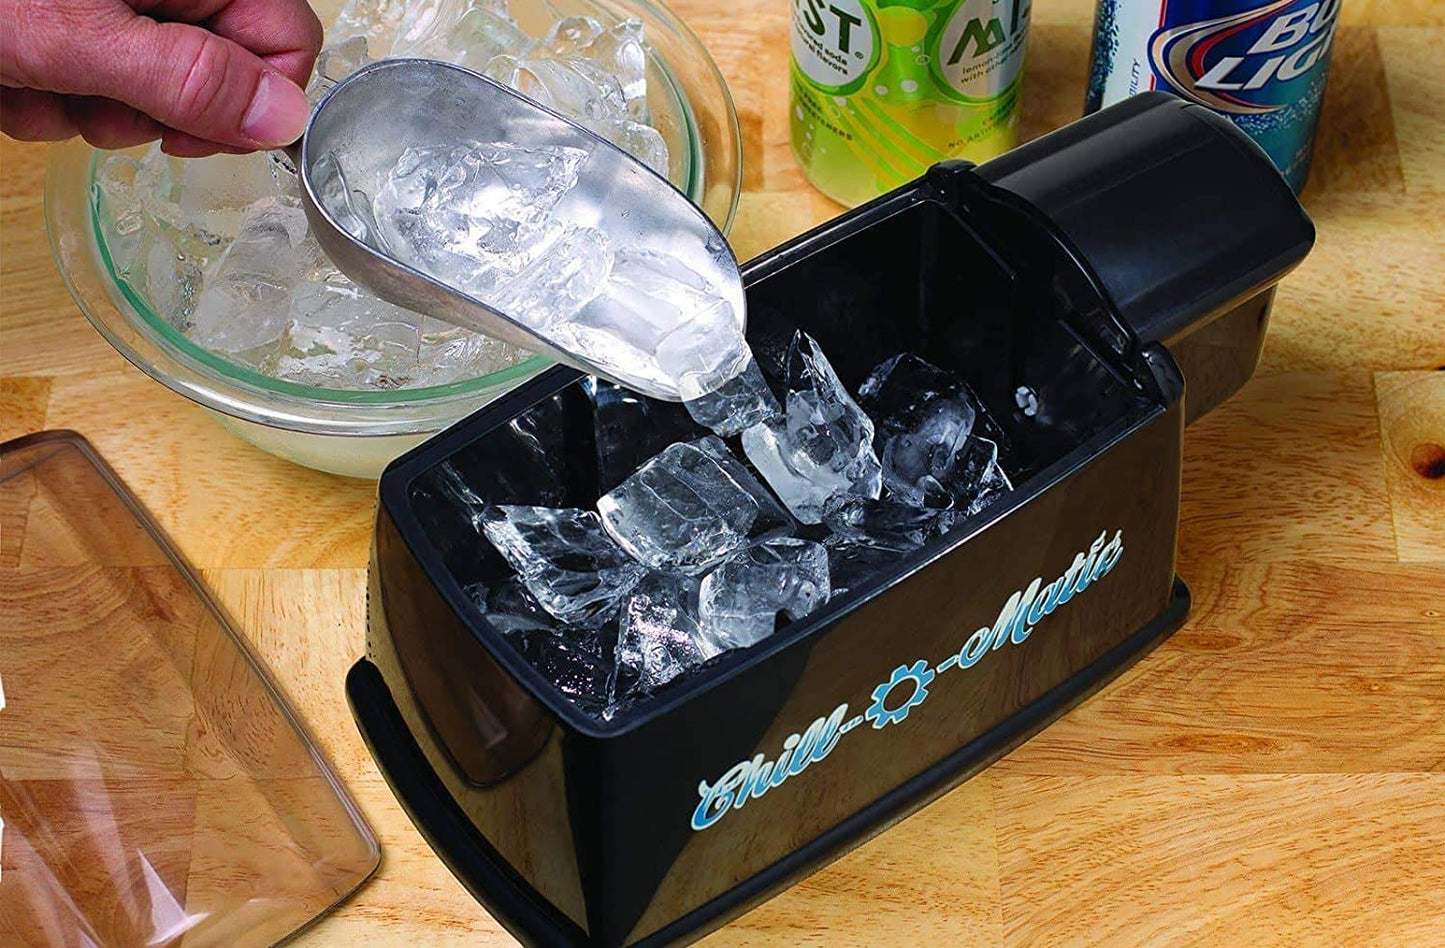 Chill-O-Matic Instant Beverage Cooler, Black